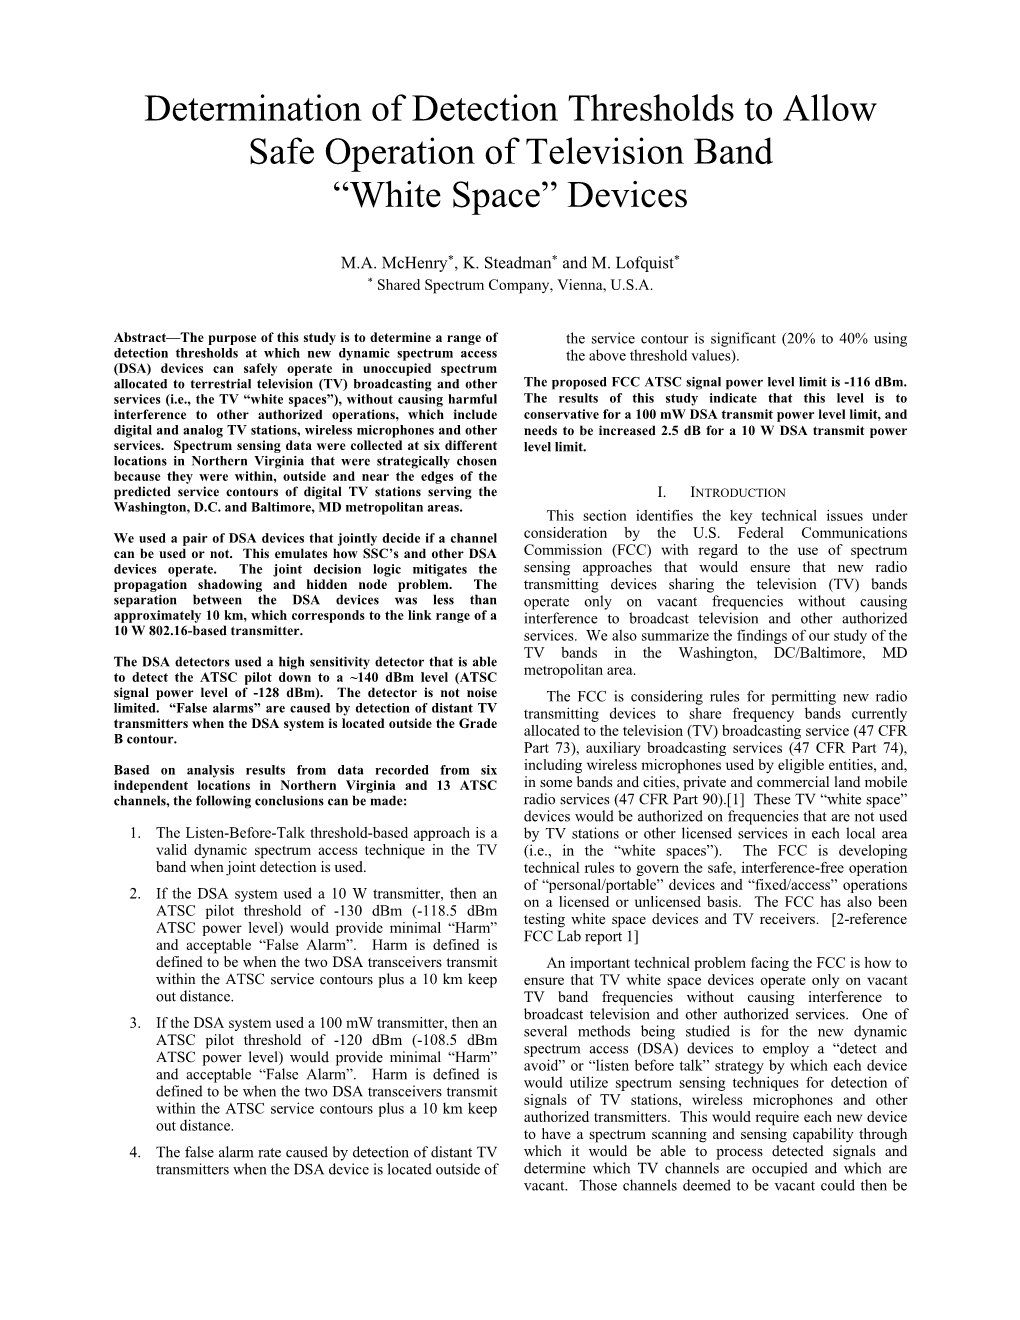 Determination of Detection Thresholds to Allow Safe Operation of Television Band “White Space” Devices